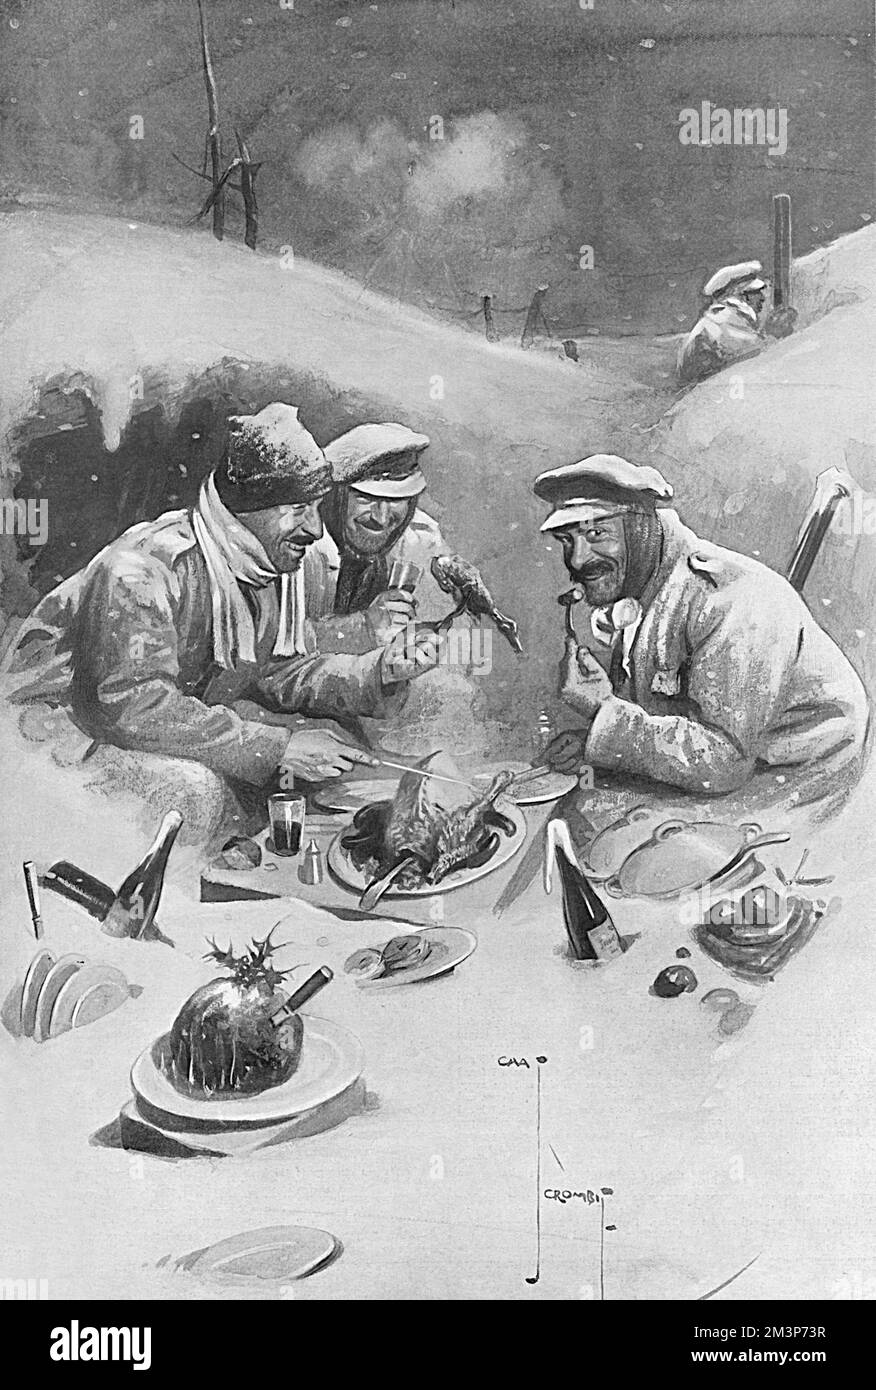 &quot;God Rest You, Merry Gentlemen, may nothing you dismay&quot; - a festive view of a British trench on the Western Front with soldiers, rather implausibly, sitting in deep snowdrifts eating a Christmas dinner of turkey, pudding and wine while a comrade further up the trench keeps a look out with a periscope.       Date: 1915 Stock Photo